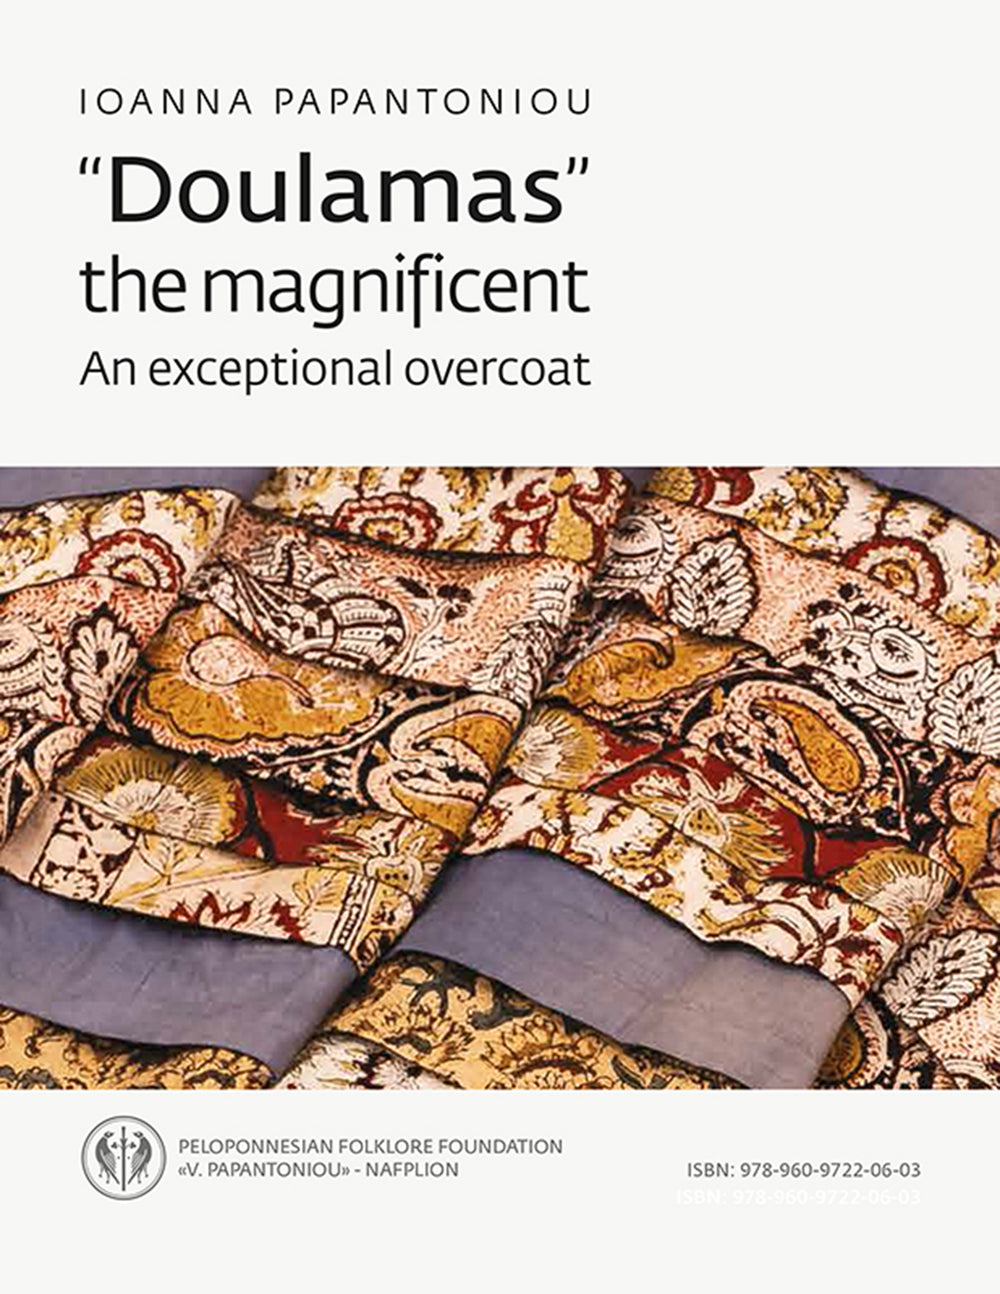 “Ioanna Papantoniou. Doulamas the magnificent. An exceptional overcoat”